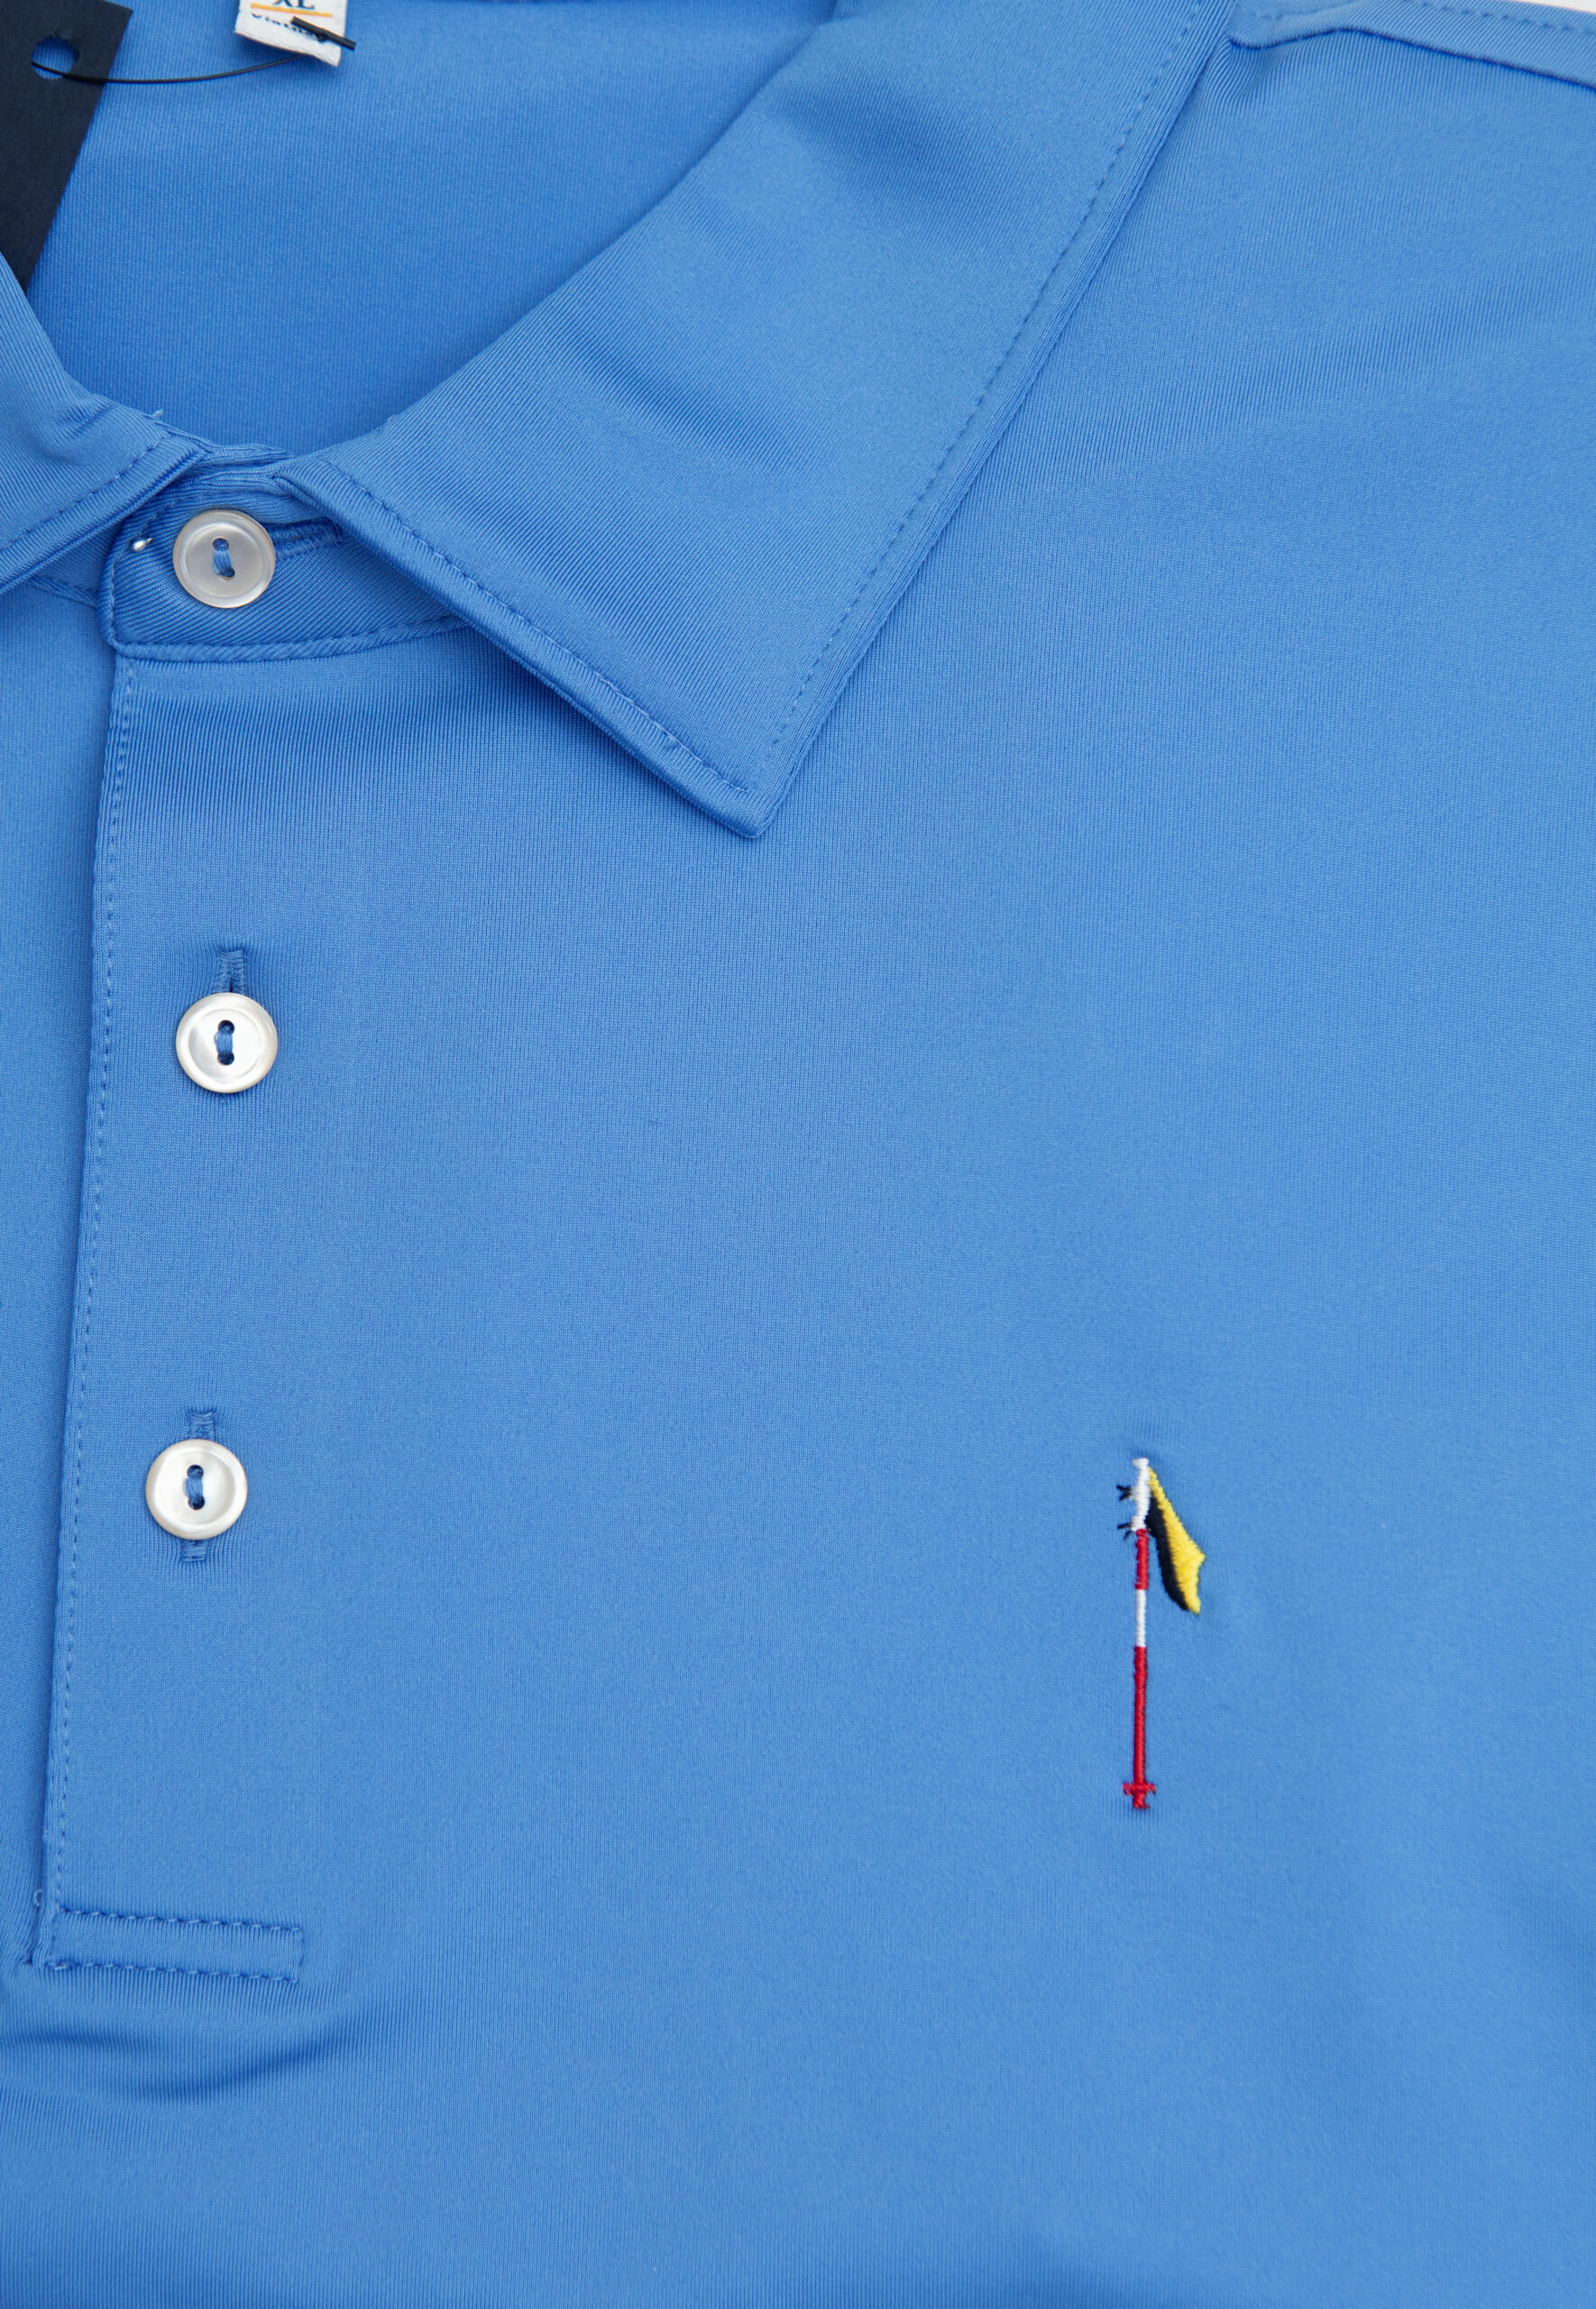 Featured image for “Golf Polo Shirt”